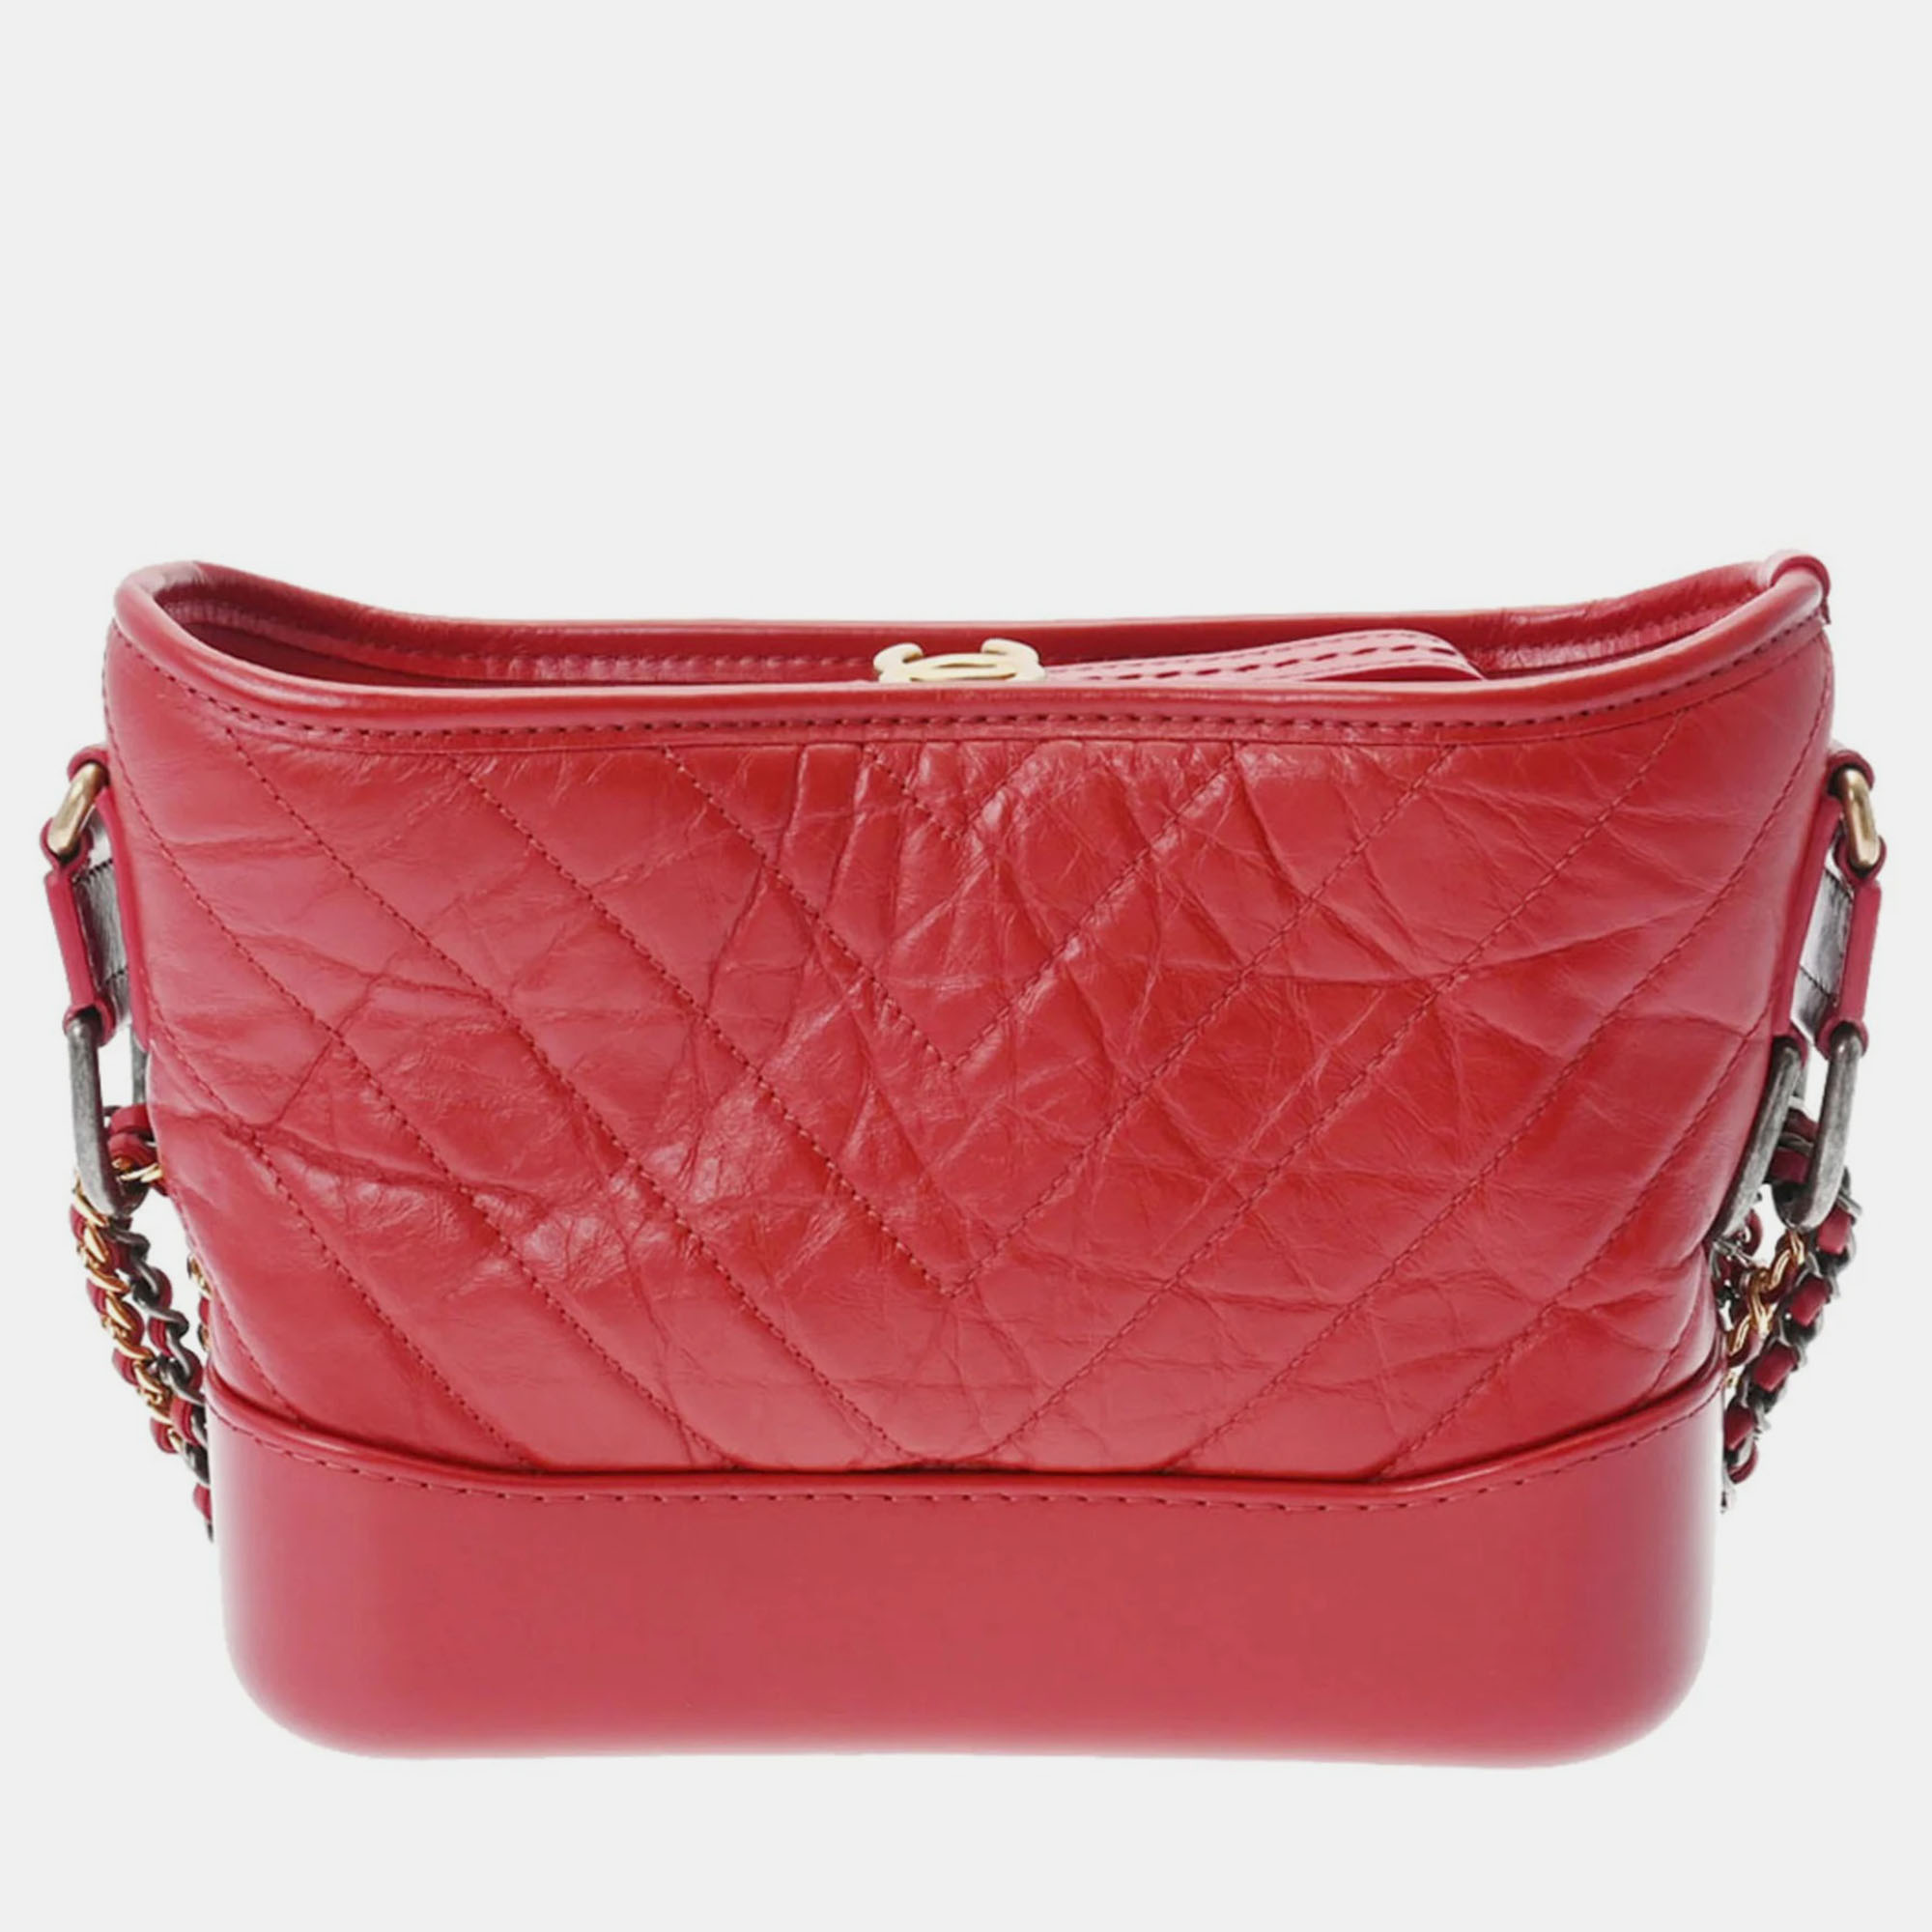 Chanel red quilted aged calfskin medium gabrielle hobo